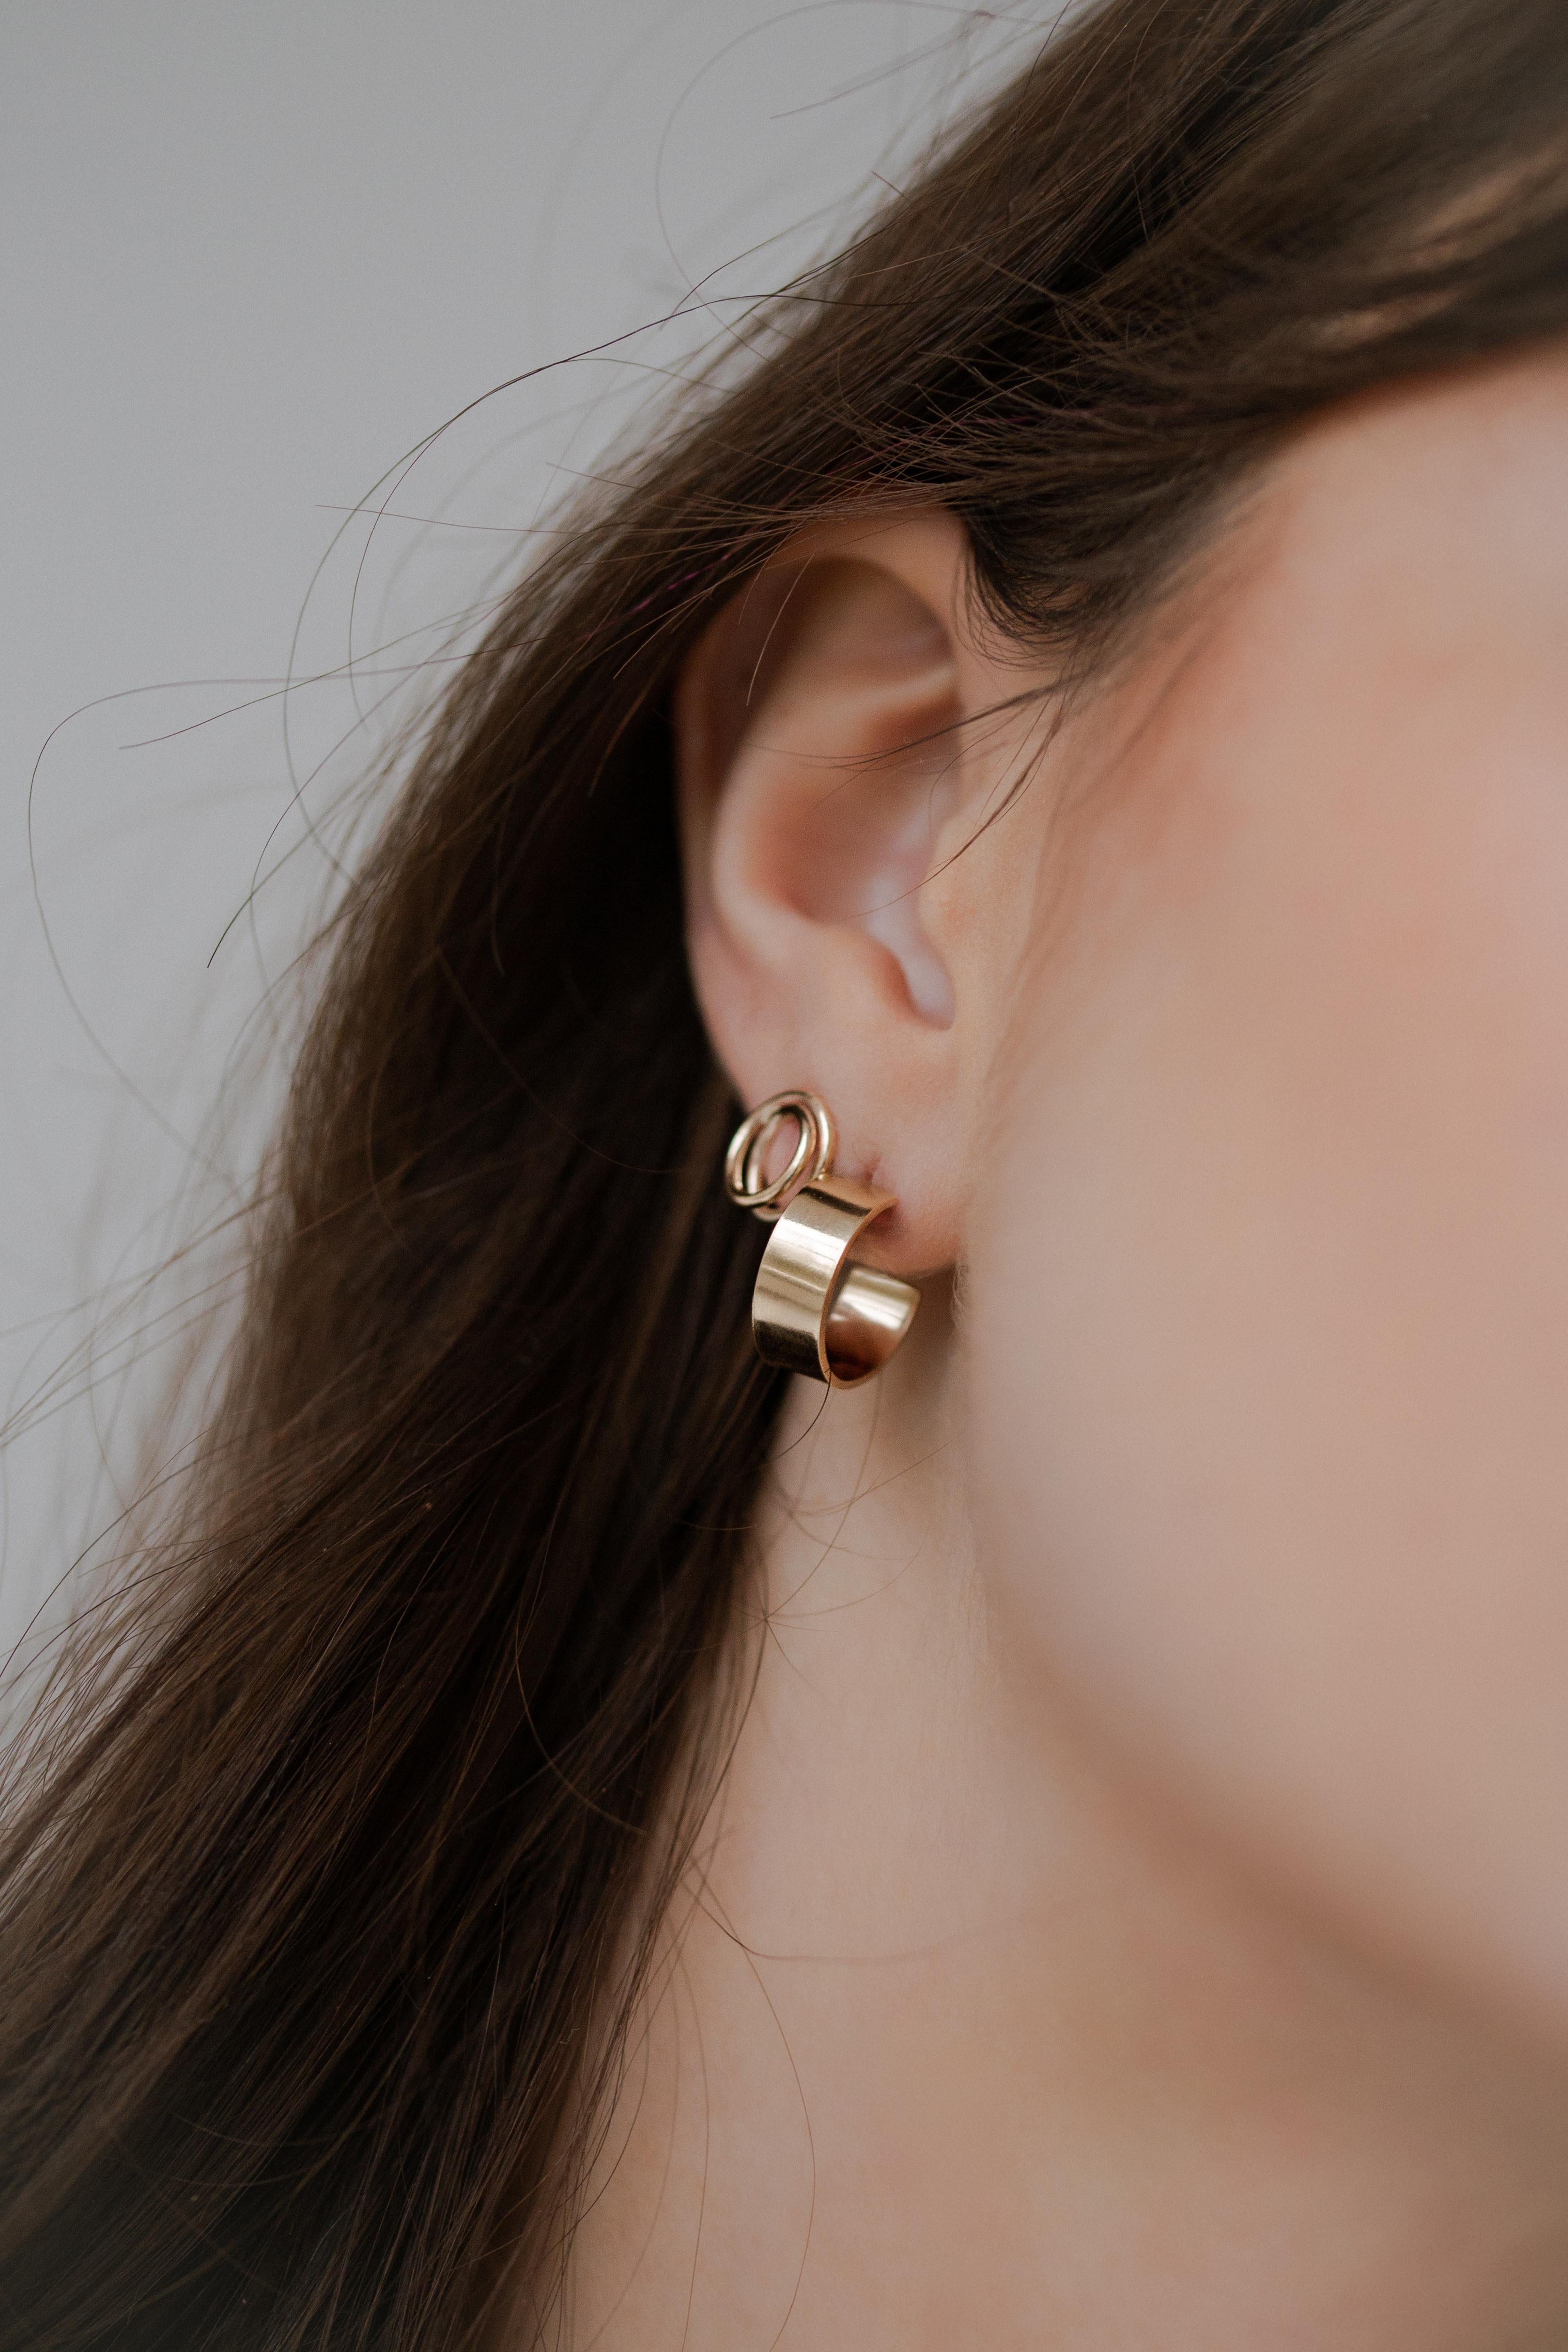 Inspired by the Everlasting Ring from the first All Day collection, the Mini Everlasting Stud Earrings form a continuous loop that sits on the ear lobe.

Handmade to order using recycled 9kt gold from our studio in North London and hallmarked by the